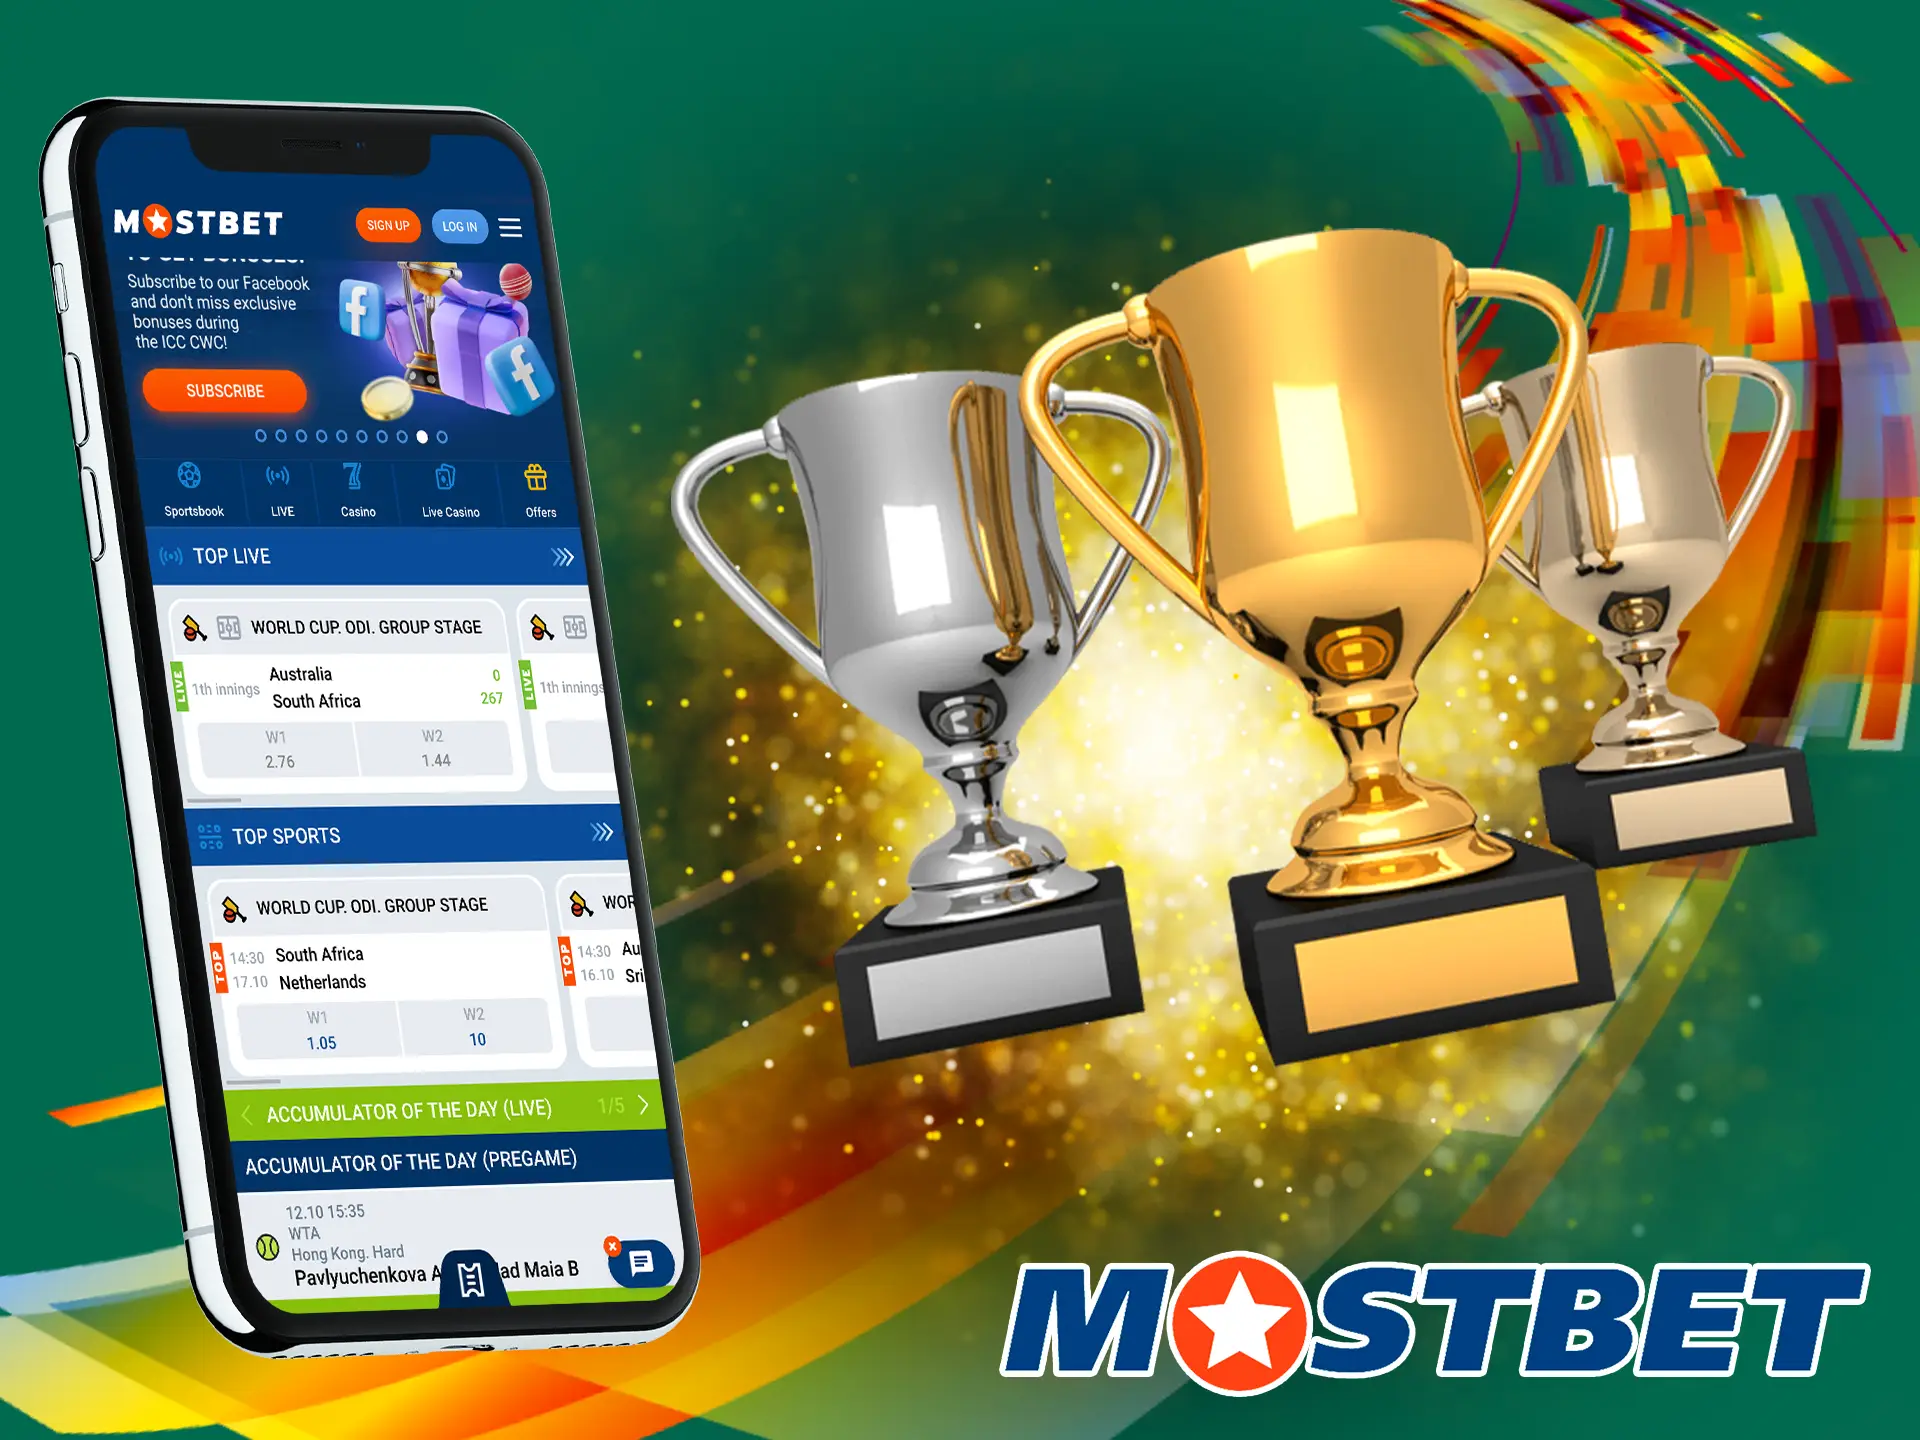 To increase your chances of winning, Mostbet offers high odds.